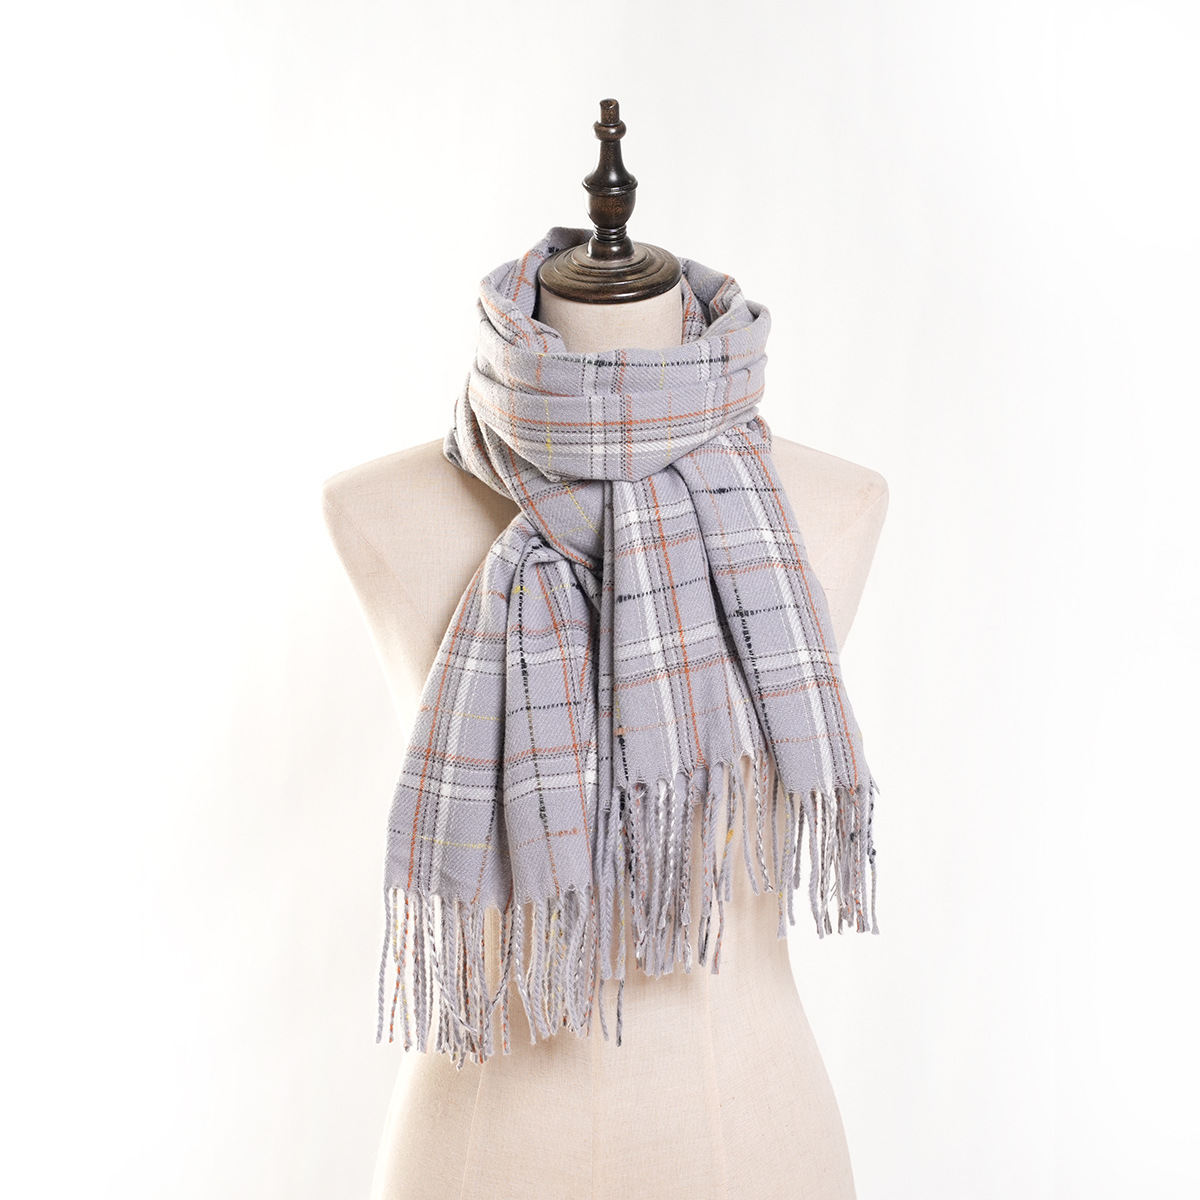 One Generation Hot-Selling New Products Cashmere-like All-Matching Striped Plaid Scarf Artistic Outer Wear Tassel Women's Scarf in Stock